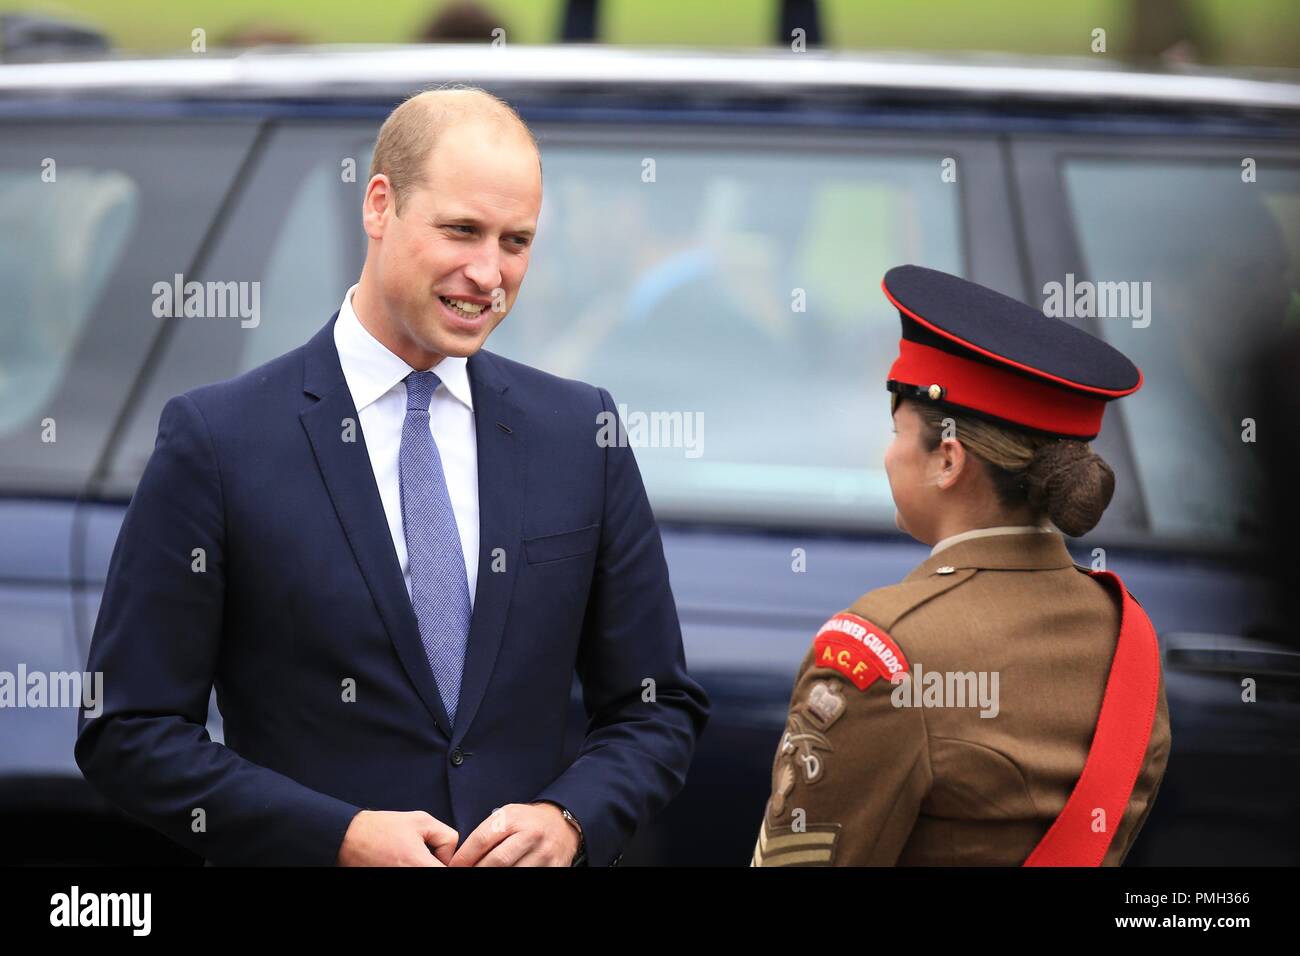 Stourbridge, West Midlands, UK. 18th September, 2018. The Duke of Cambridge, Prince William, meets admirers as visits Stourbridge to unveil a new statue of Frank Foley, often called the 'British Schindler'. Major Foley was an undercover British spy based in Berlin where he provided documents to help 10,000 Jewish men, women and children escape before the Second World War. Peter Lopeman/Alamy Live News Stock Photo